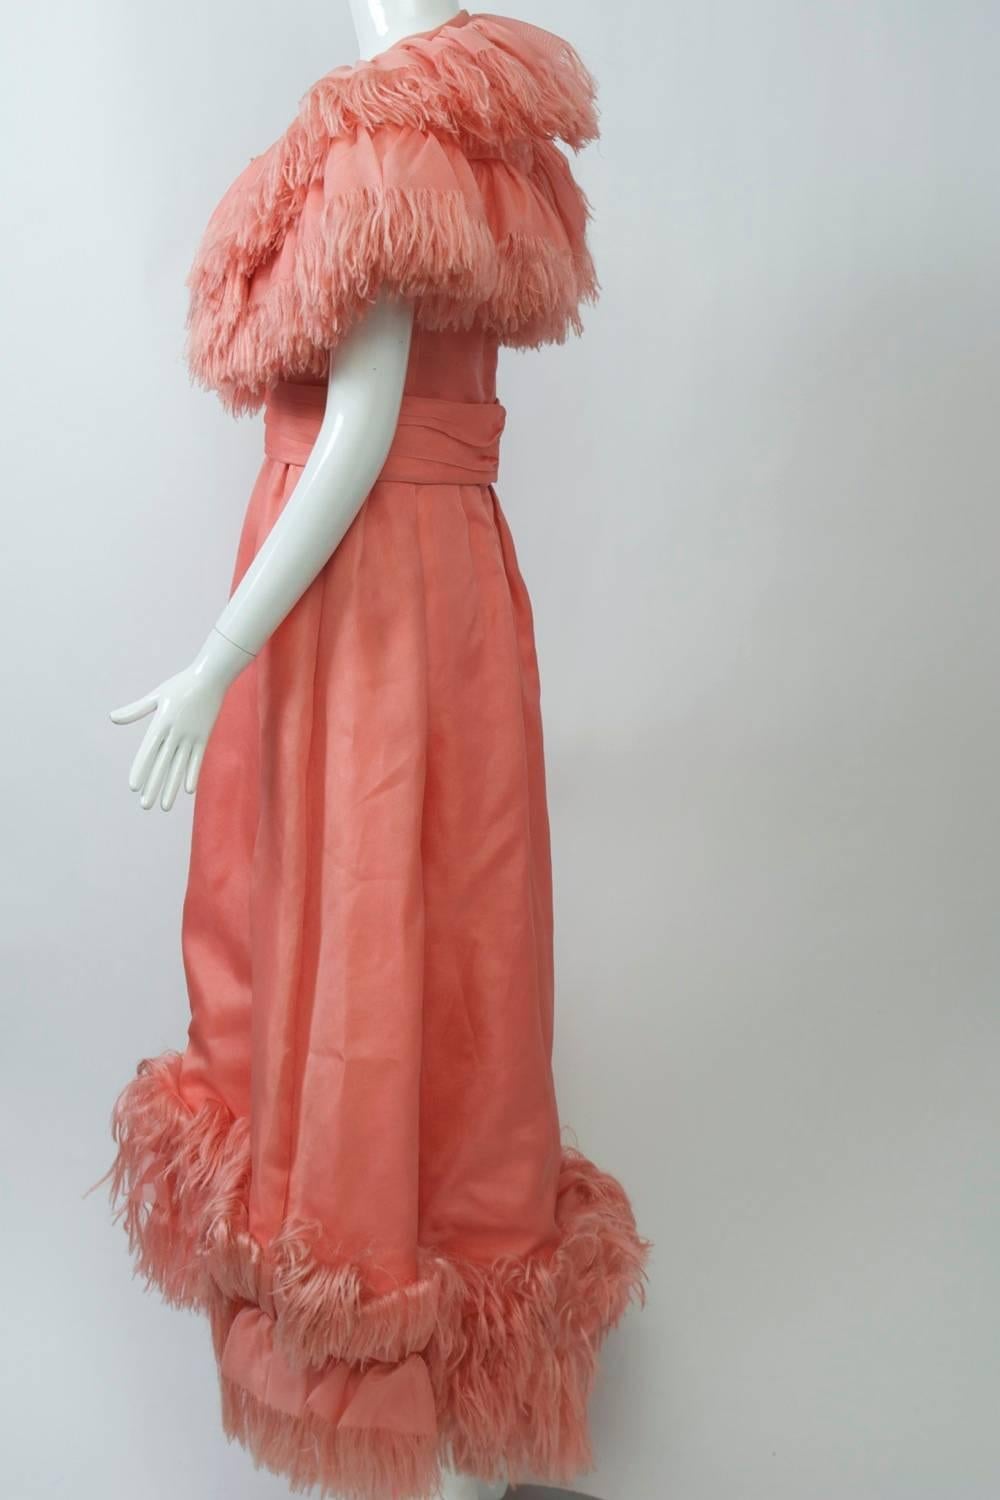 1970s custom-made  gown in peach gazar with unique fringed ruffle capelet and hem border. The sleeveless dress features a U neckline and pleated matching belt that fastens in back. Layers of the fabric comprise the double ruffle capelet, which has